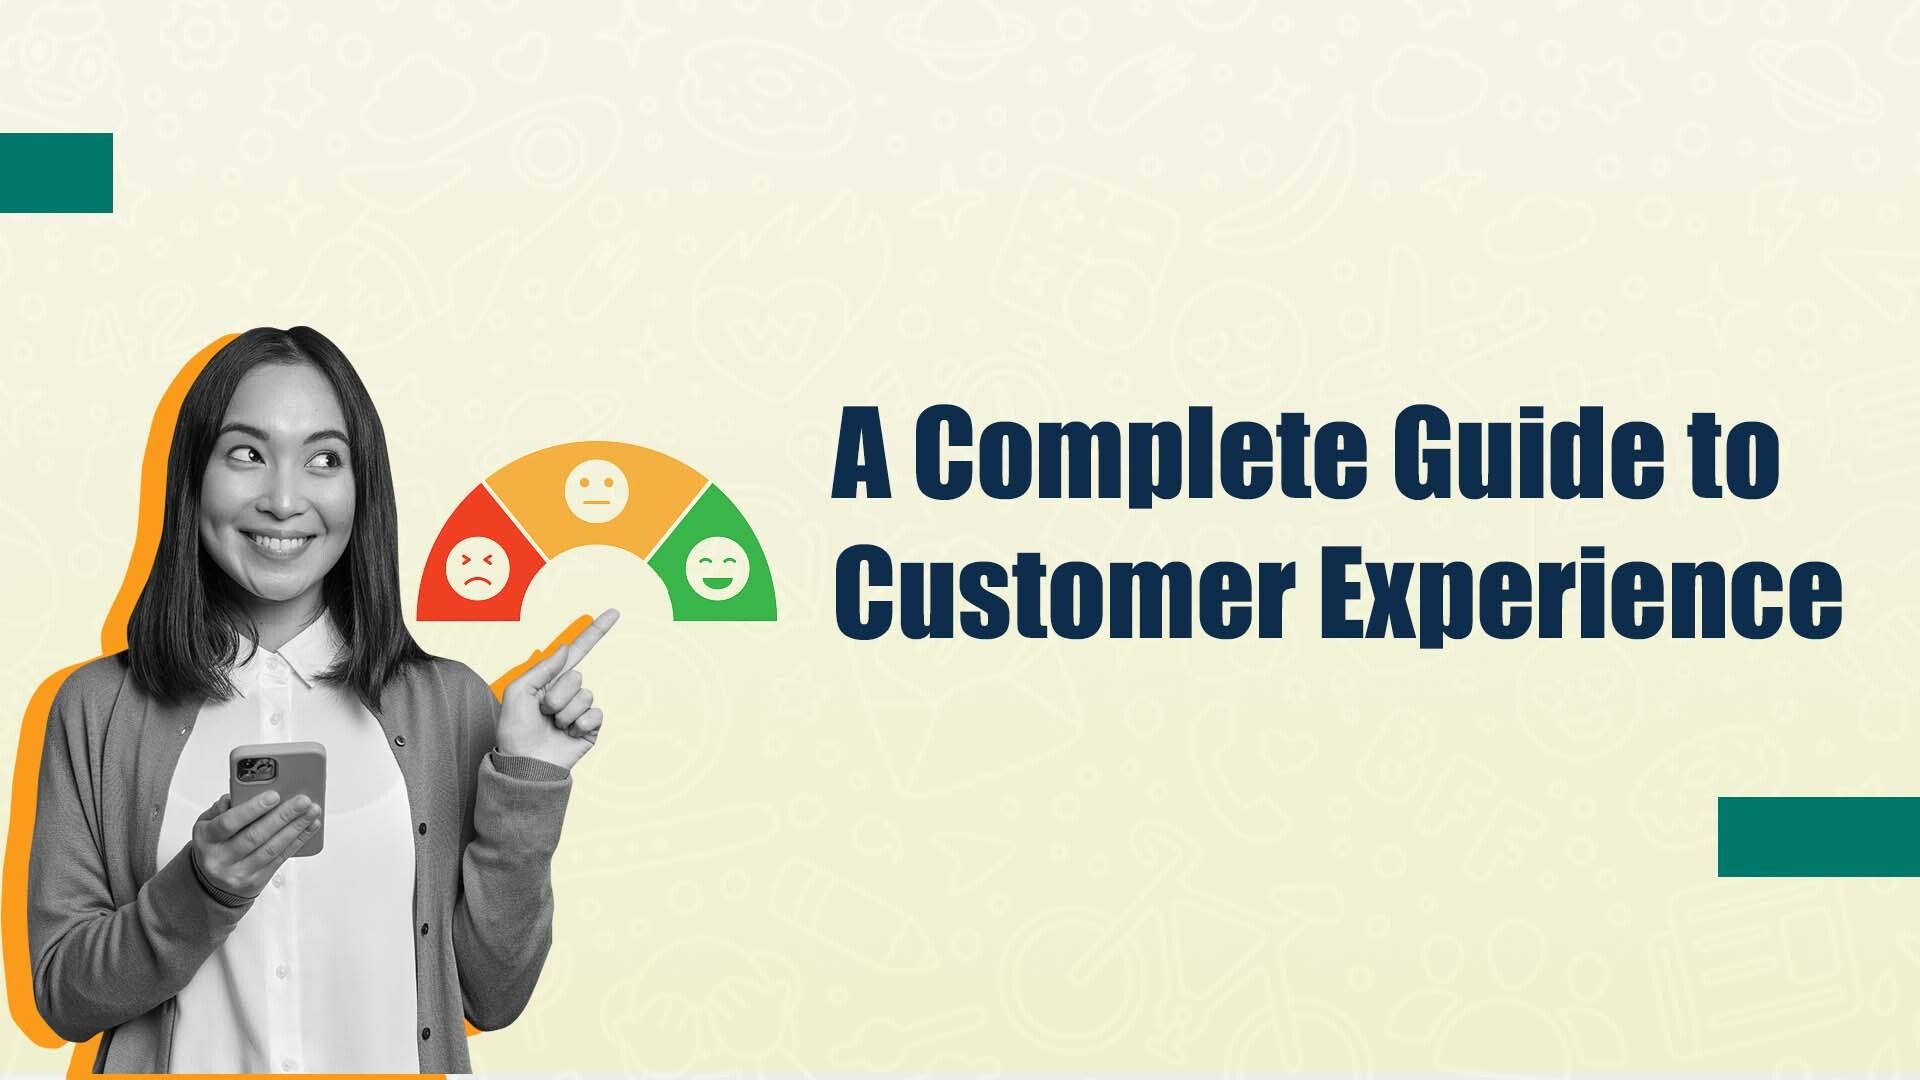 A Complete Guide to Customer Experience